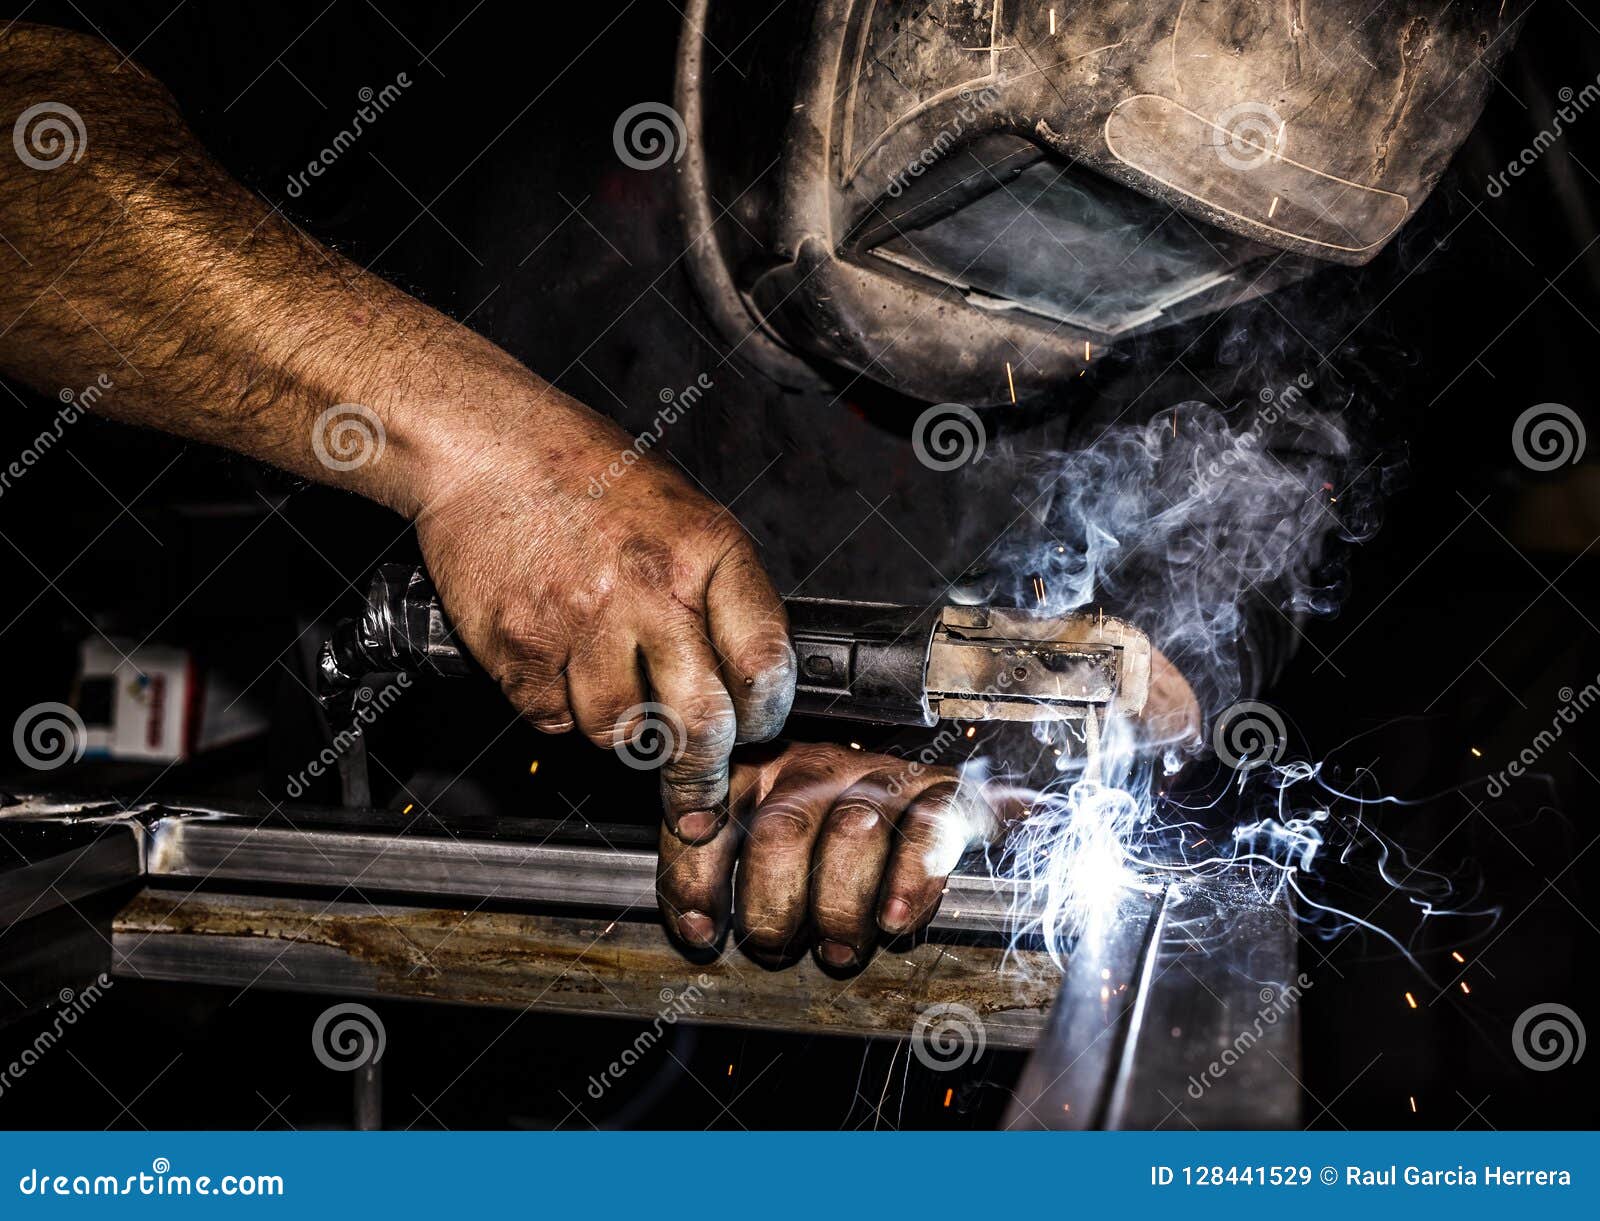 profesional welder in protective mask welding metal and sparks metal